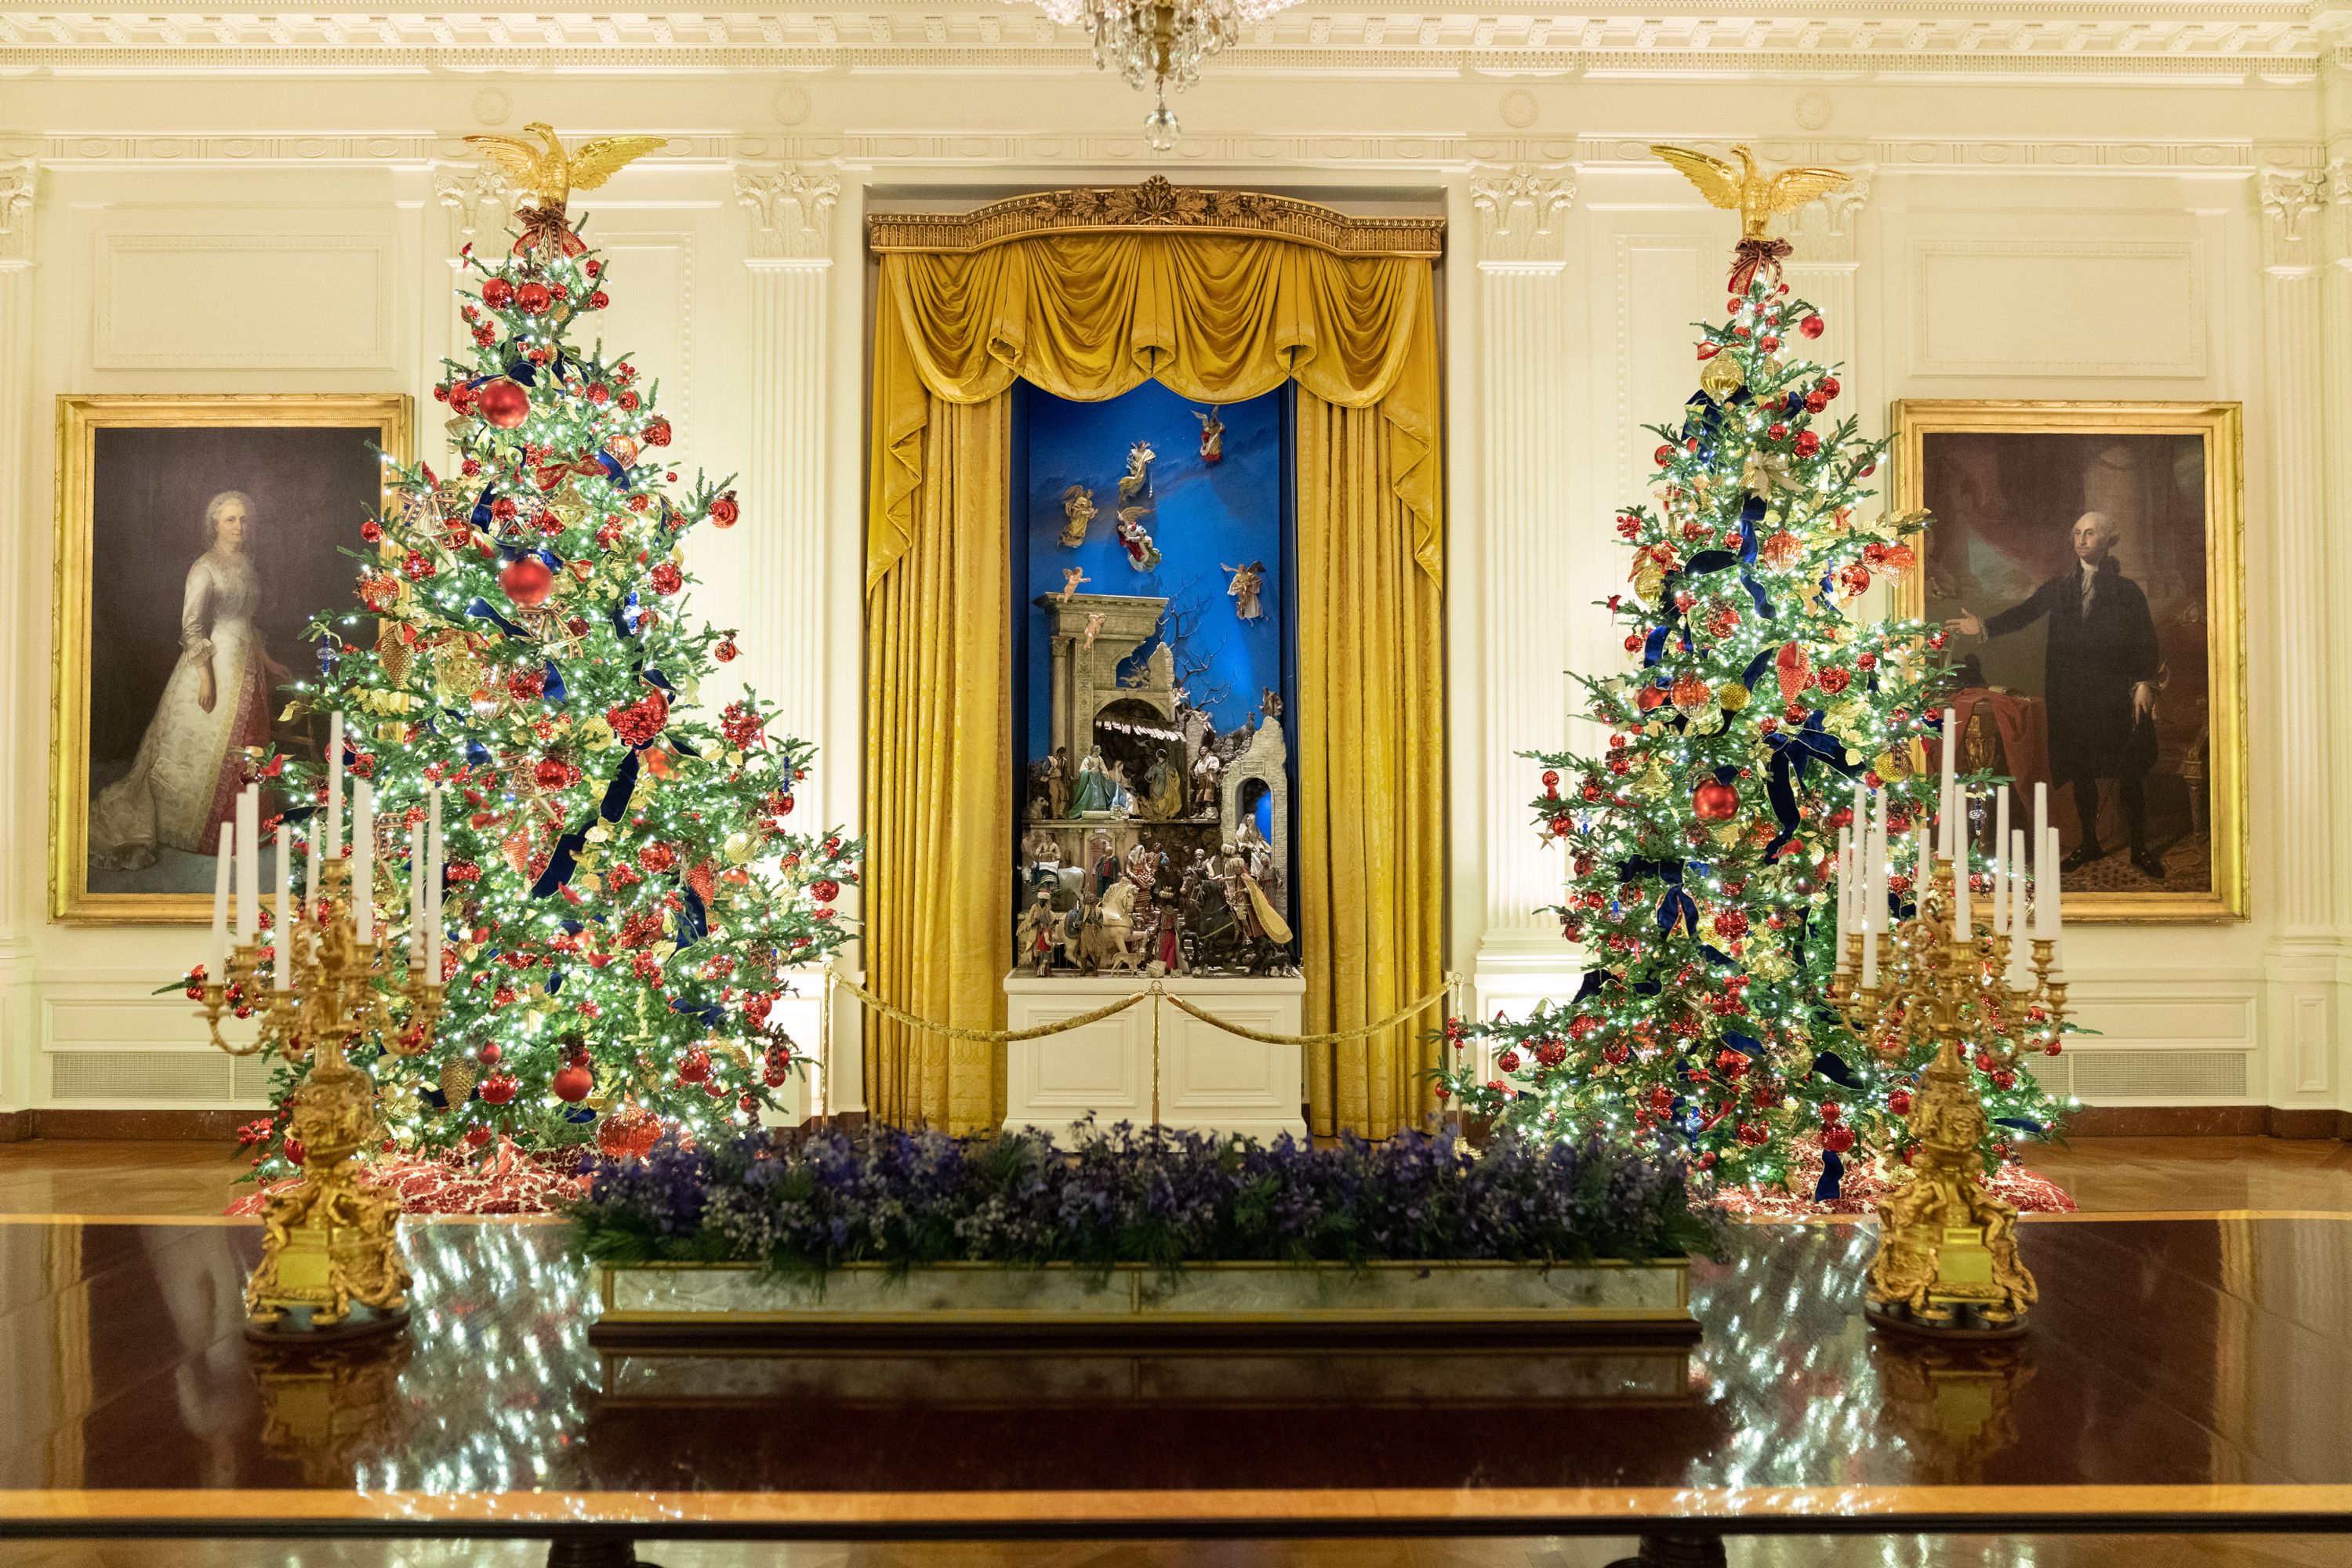 White House Christmas decorations celebrate We the People